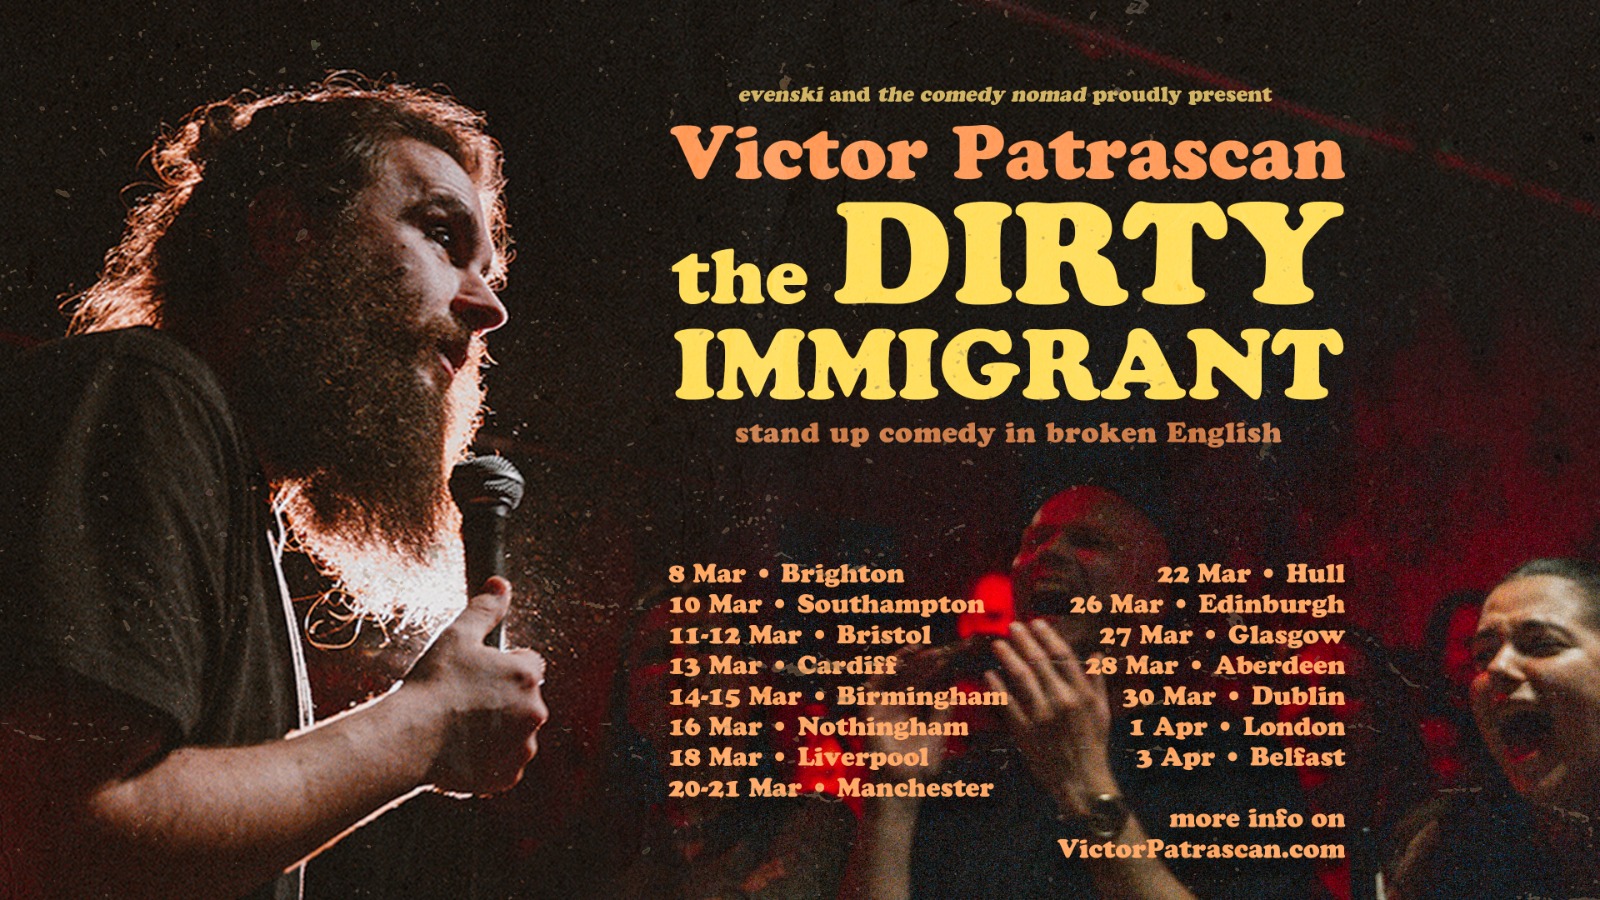 The Dirty Immigrant, Stand up Comedy in English